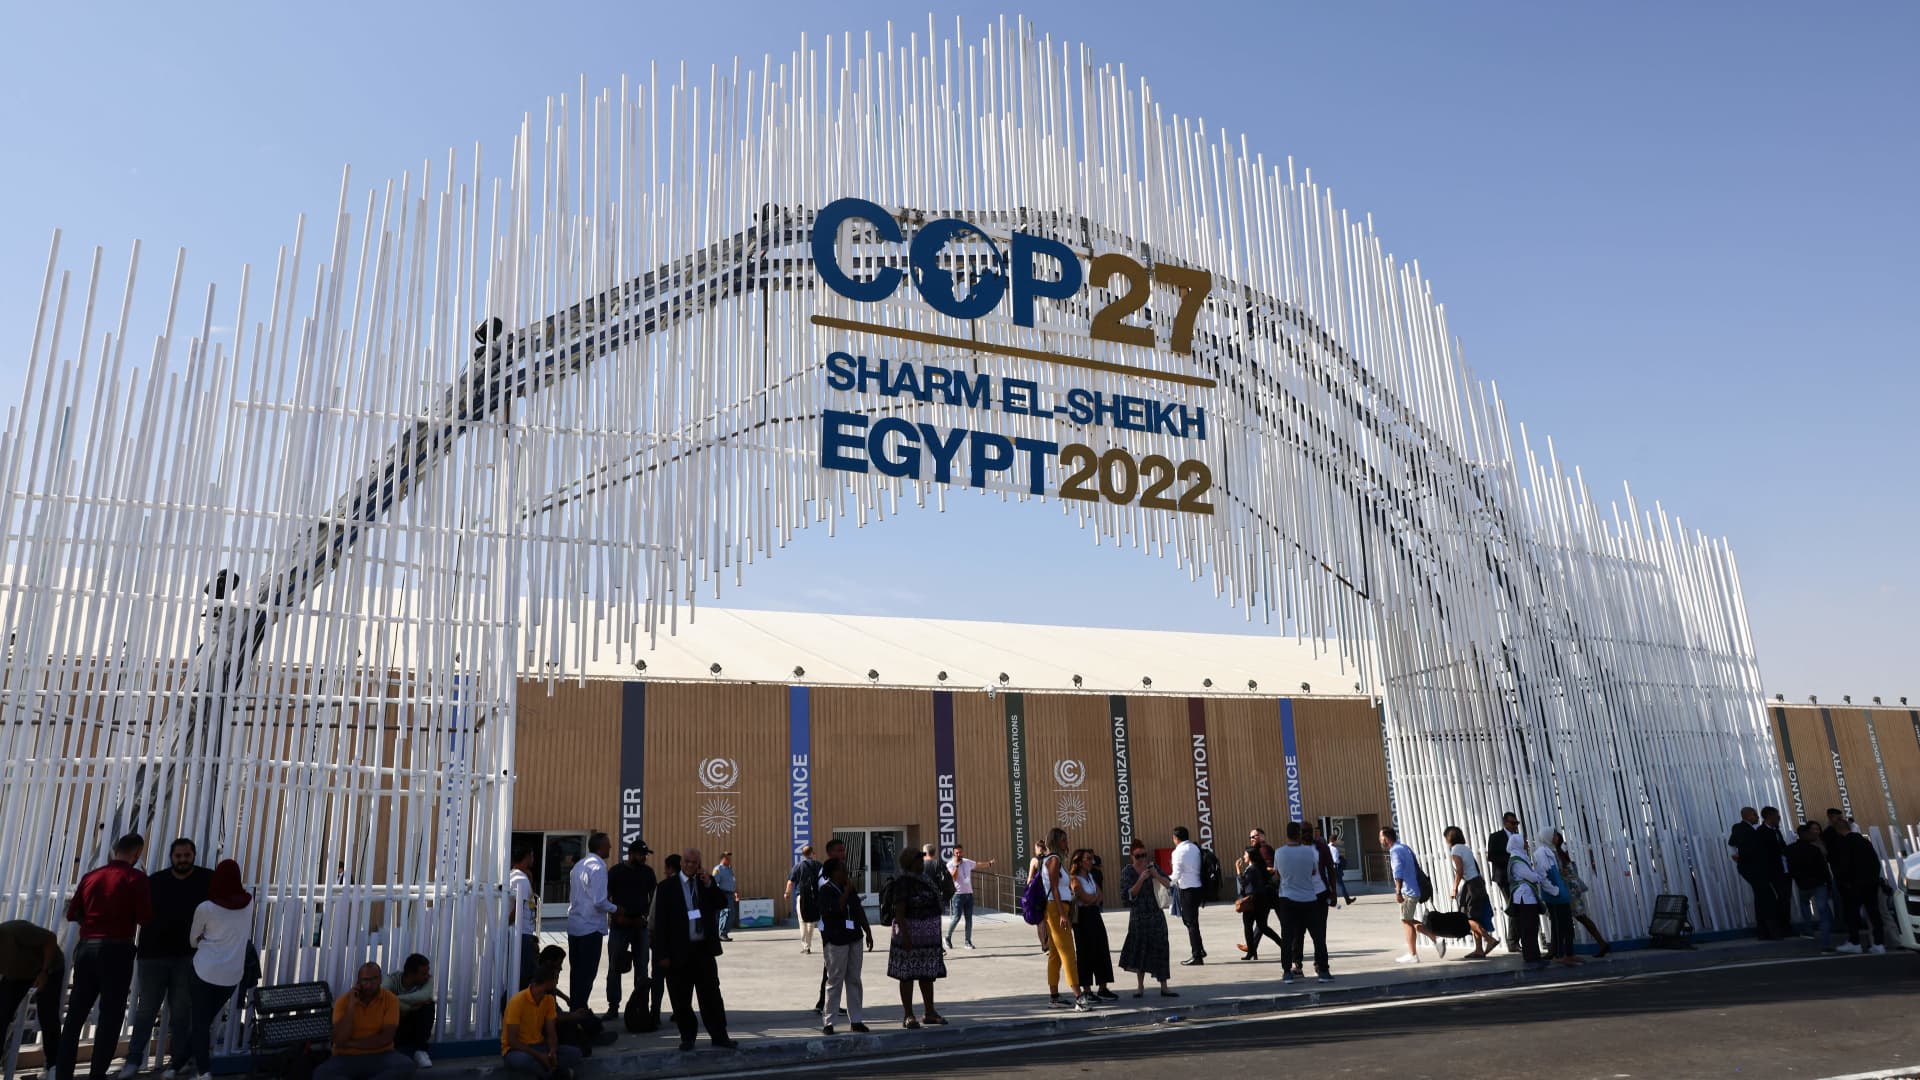 Flowing sewage, bewildering signs, lack of water: COP27 faces logistics